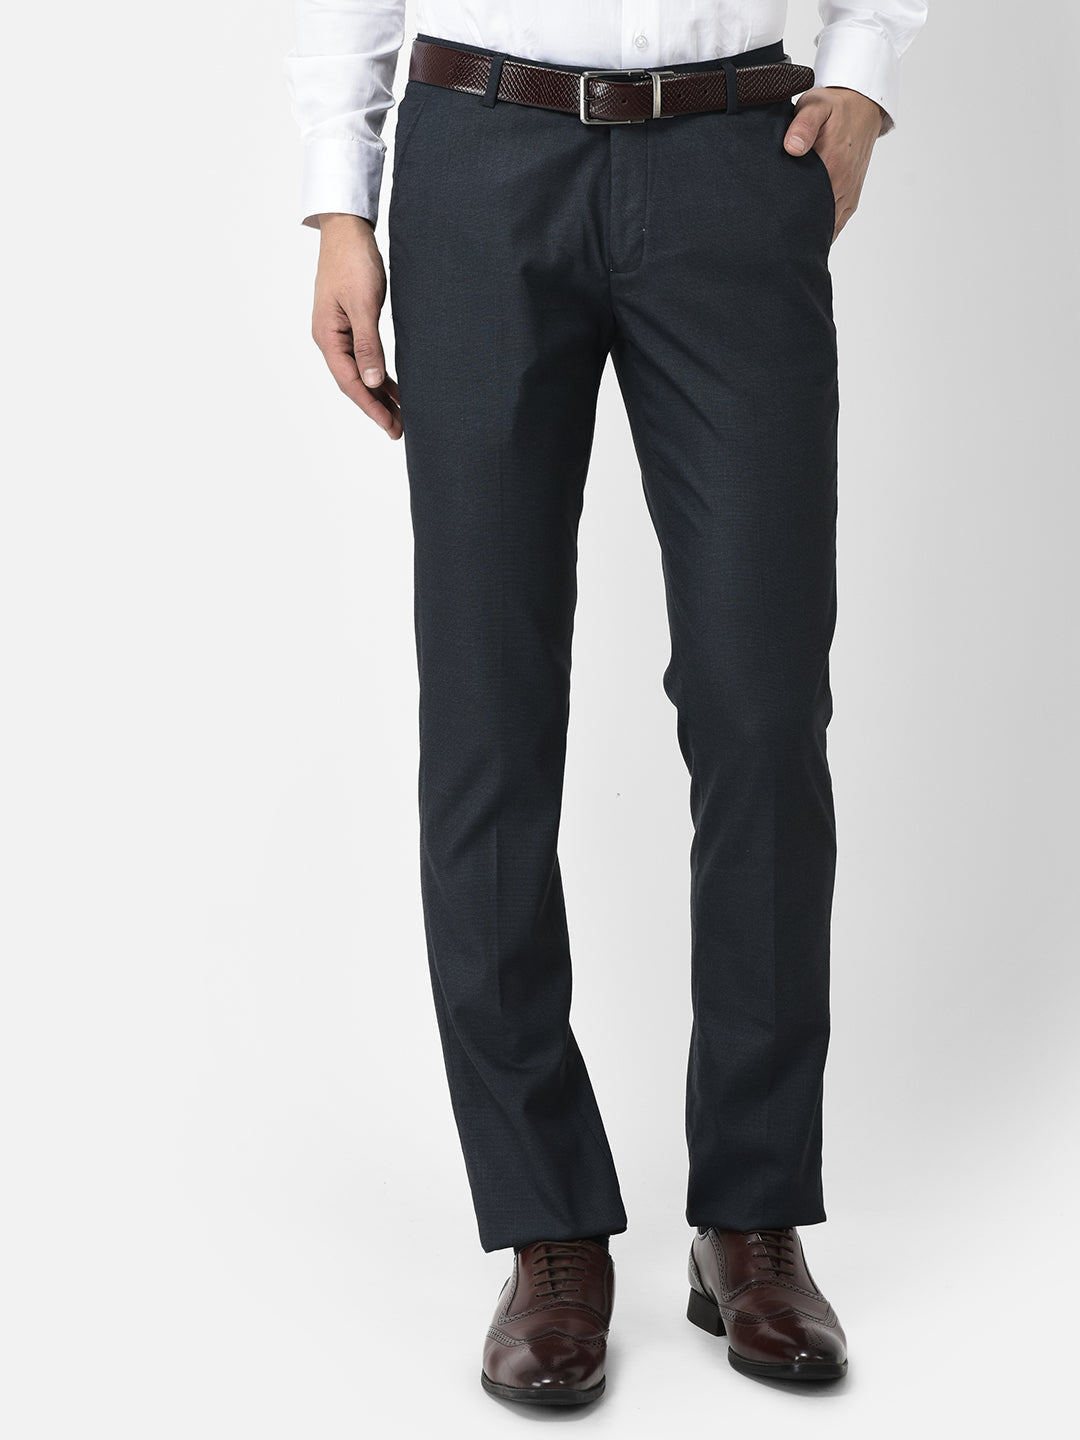 Buy Navy Blue Trousers online in India